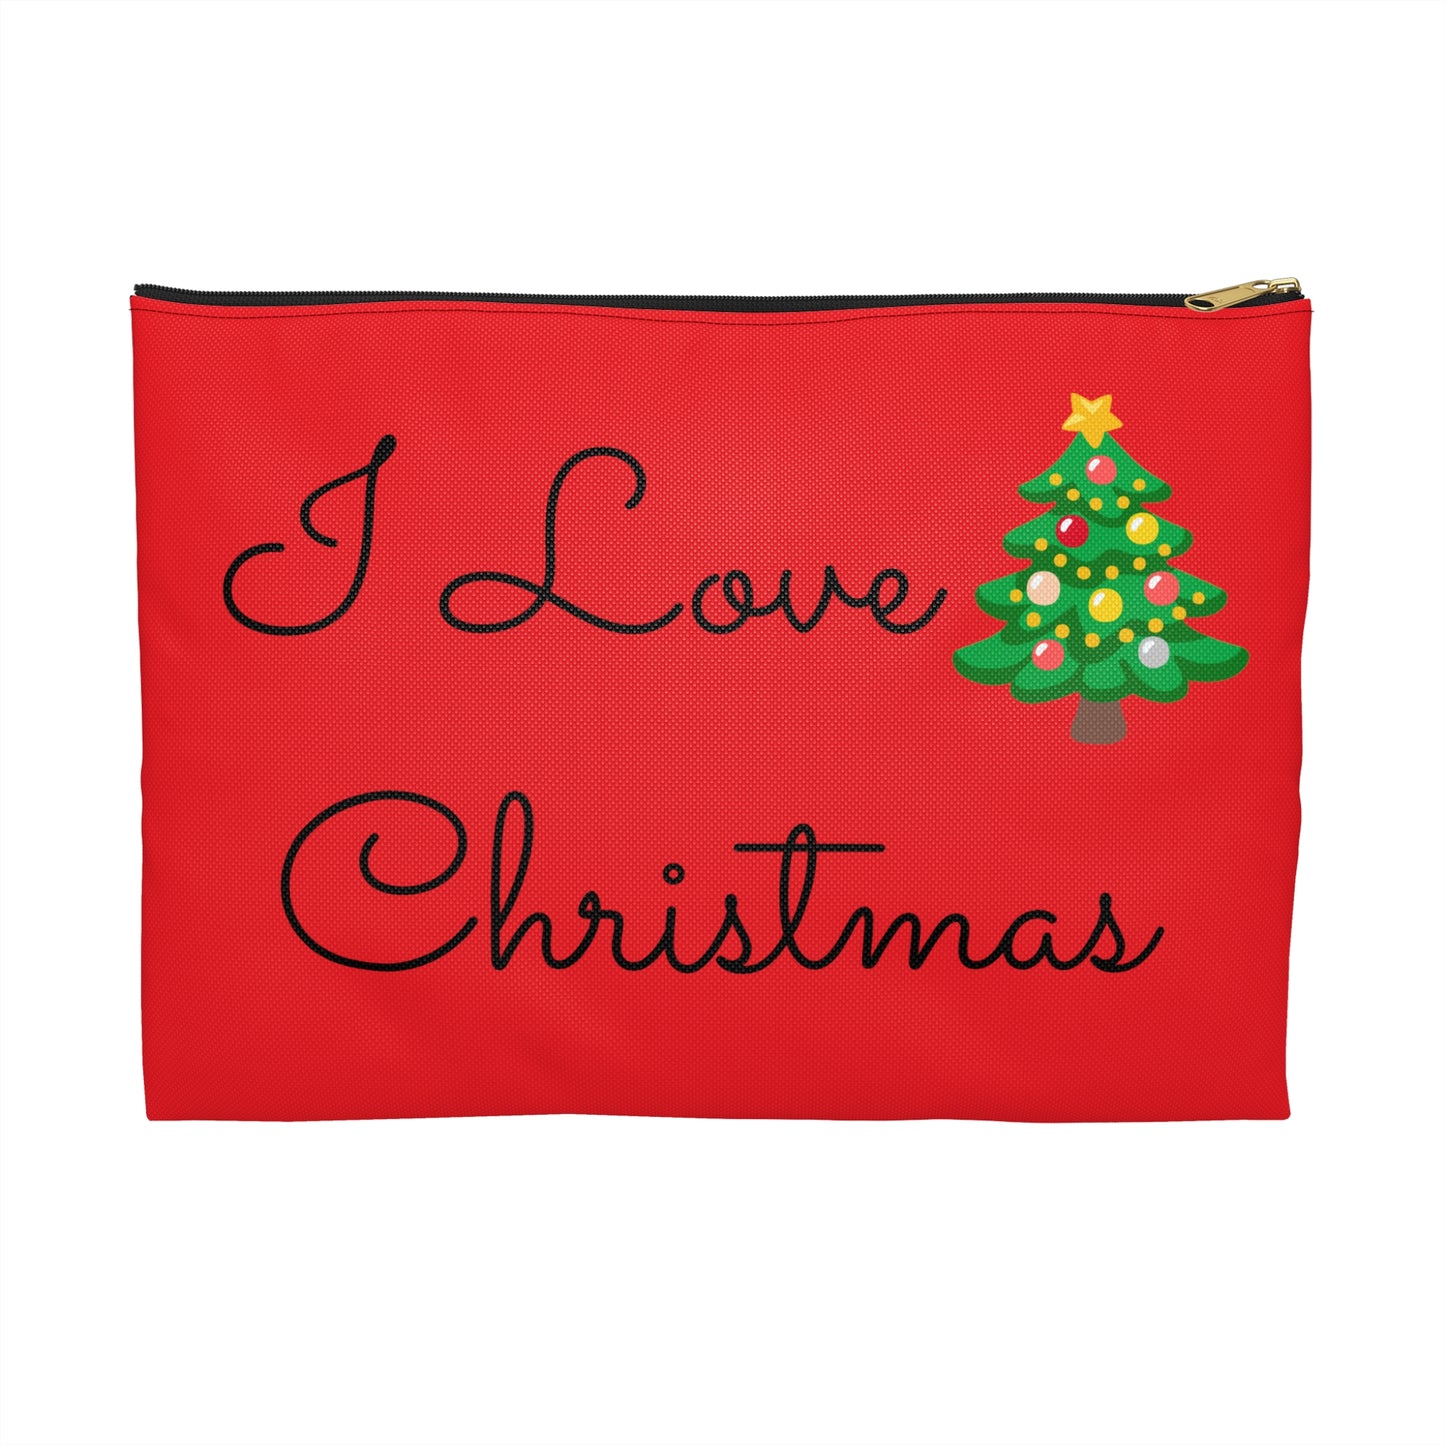 I Love Christmas Accessory Pouch